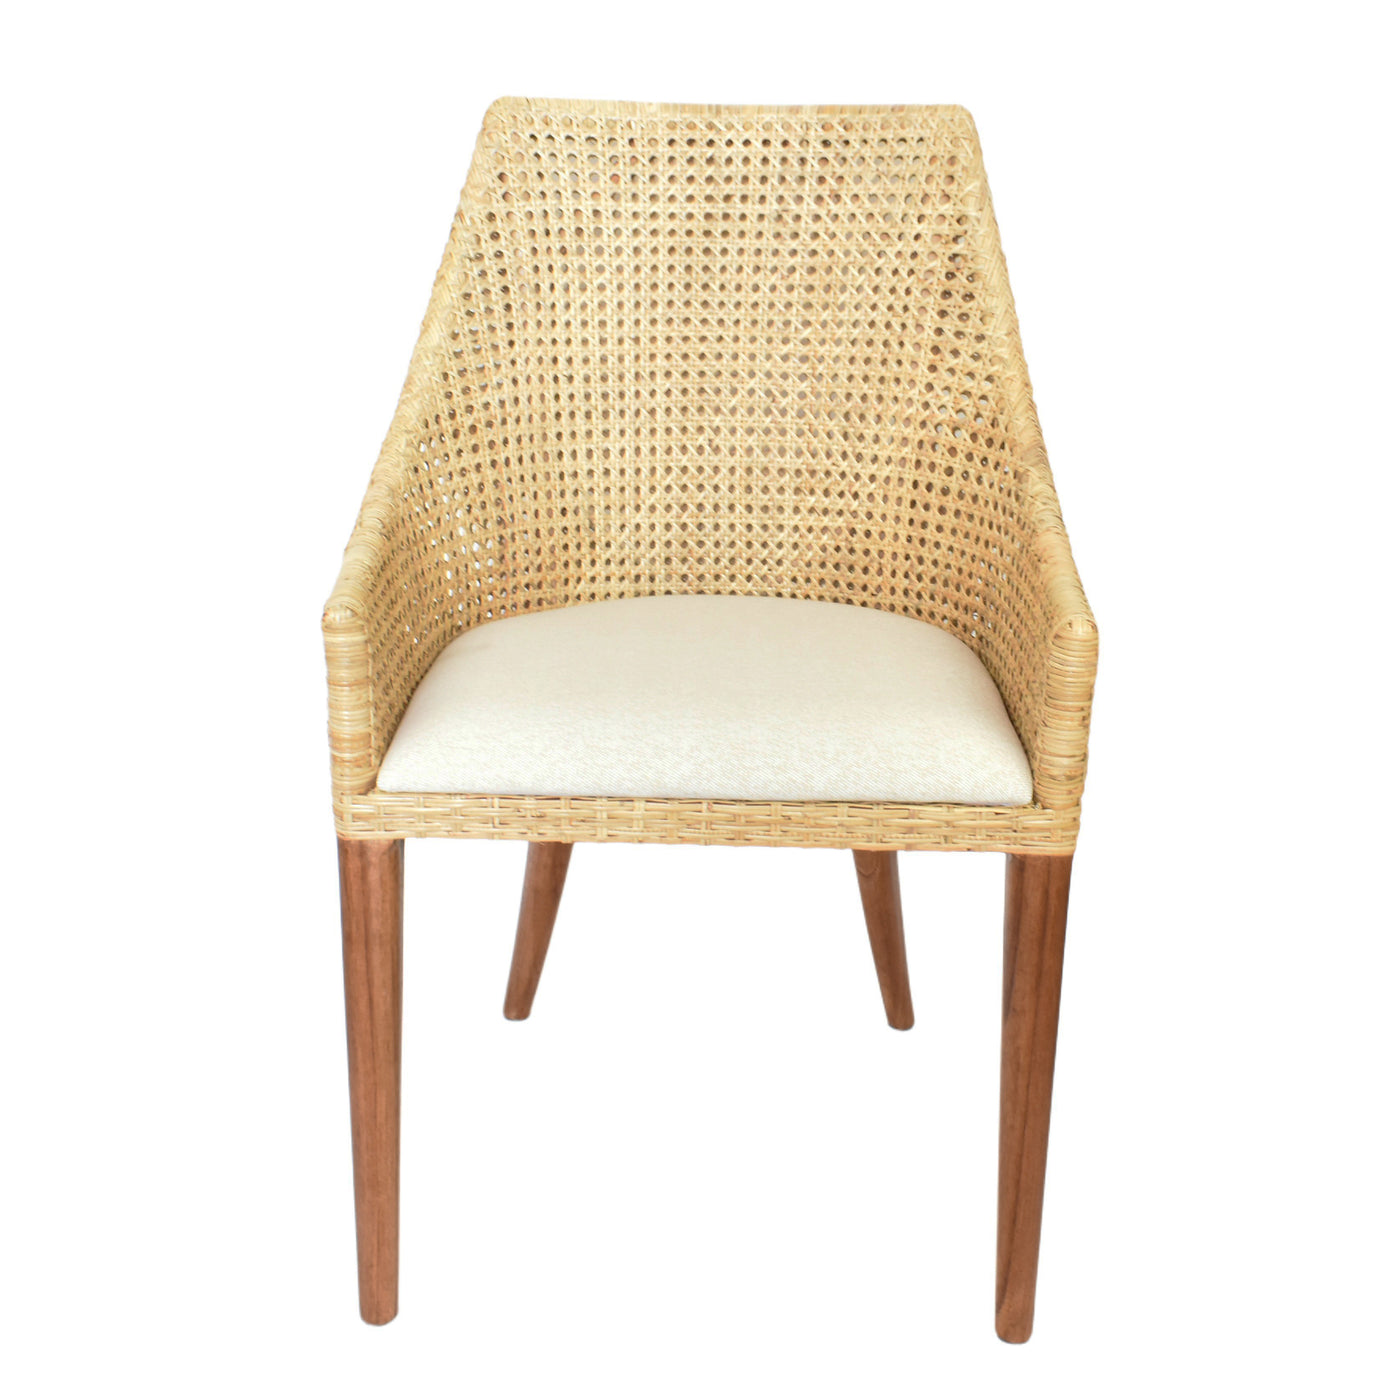 Classic Weave Dining Chair - Light